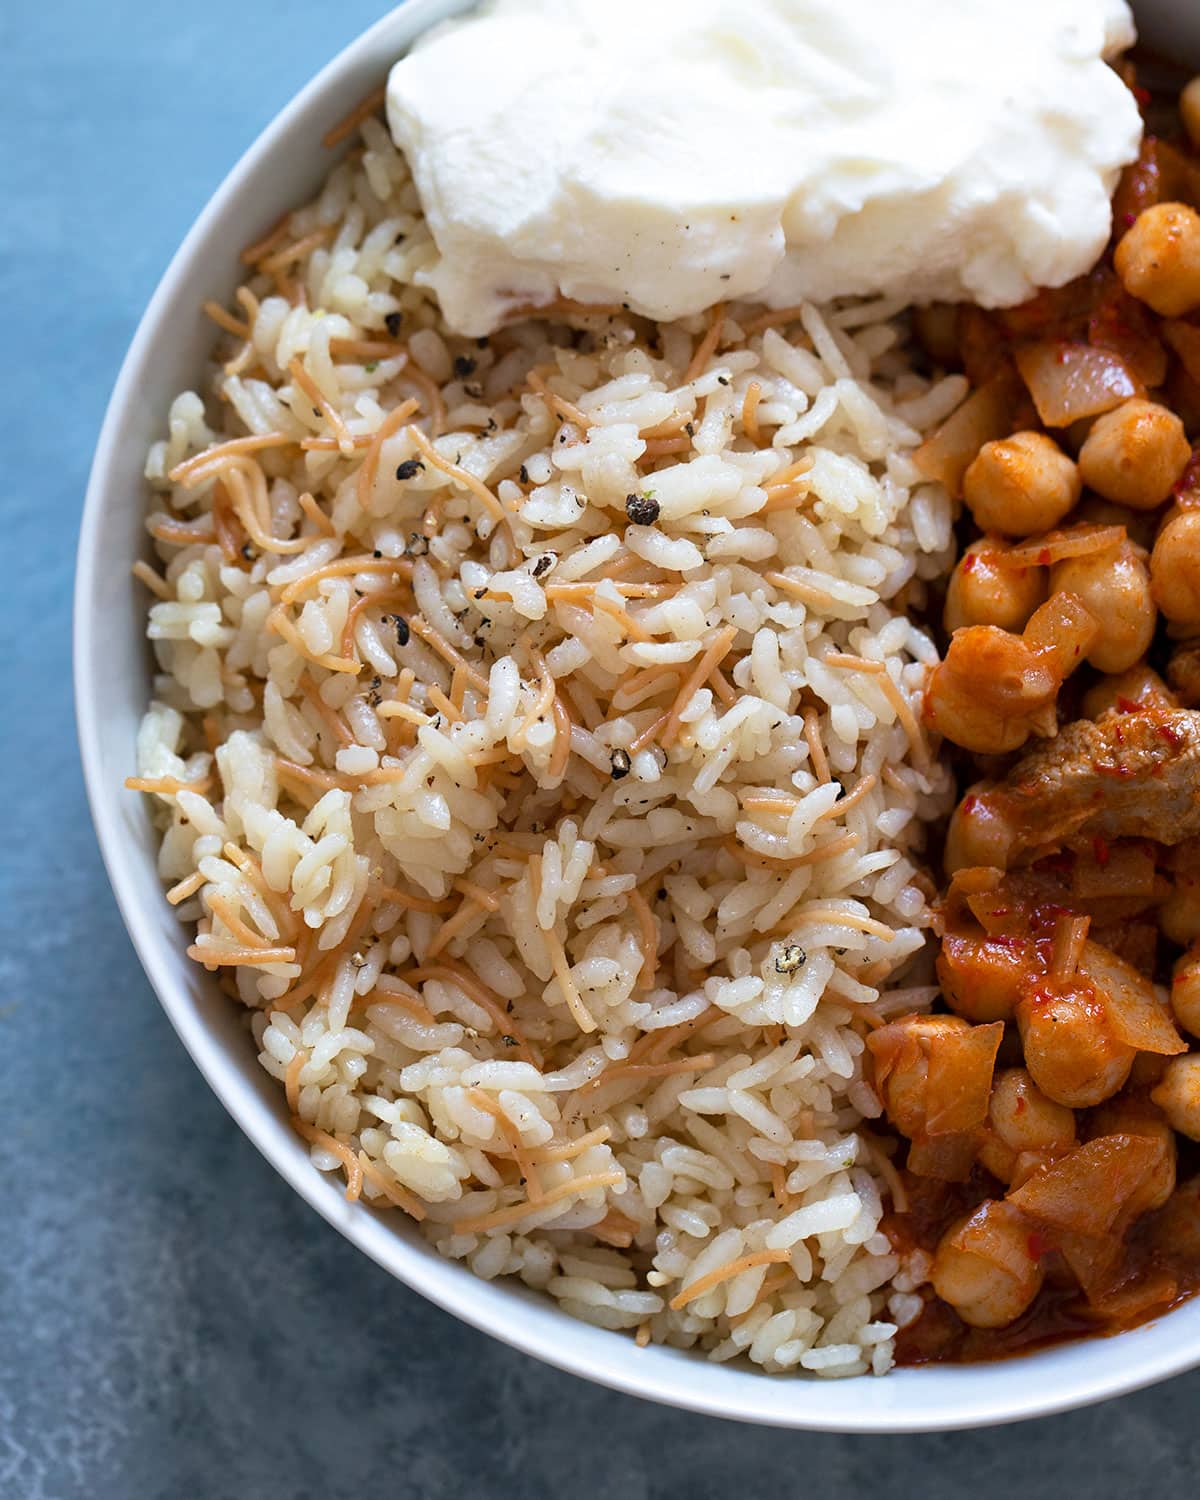 turkish rice pilaf on a plate